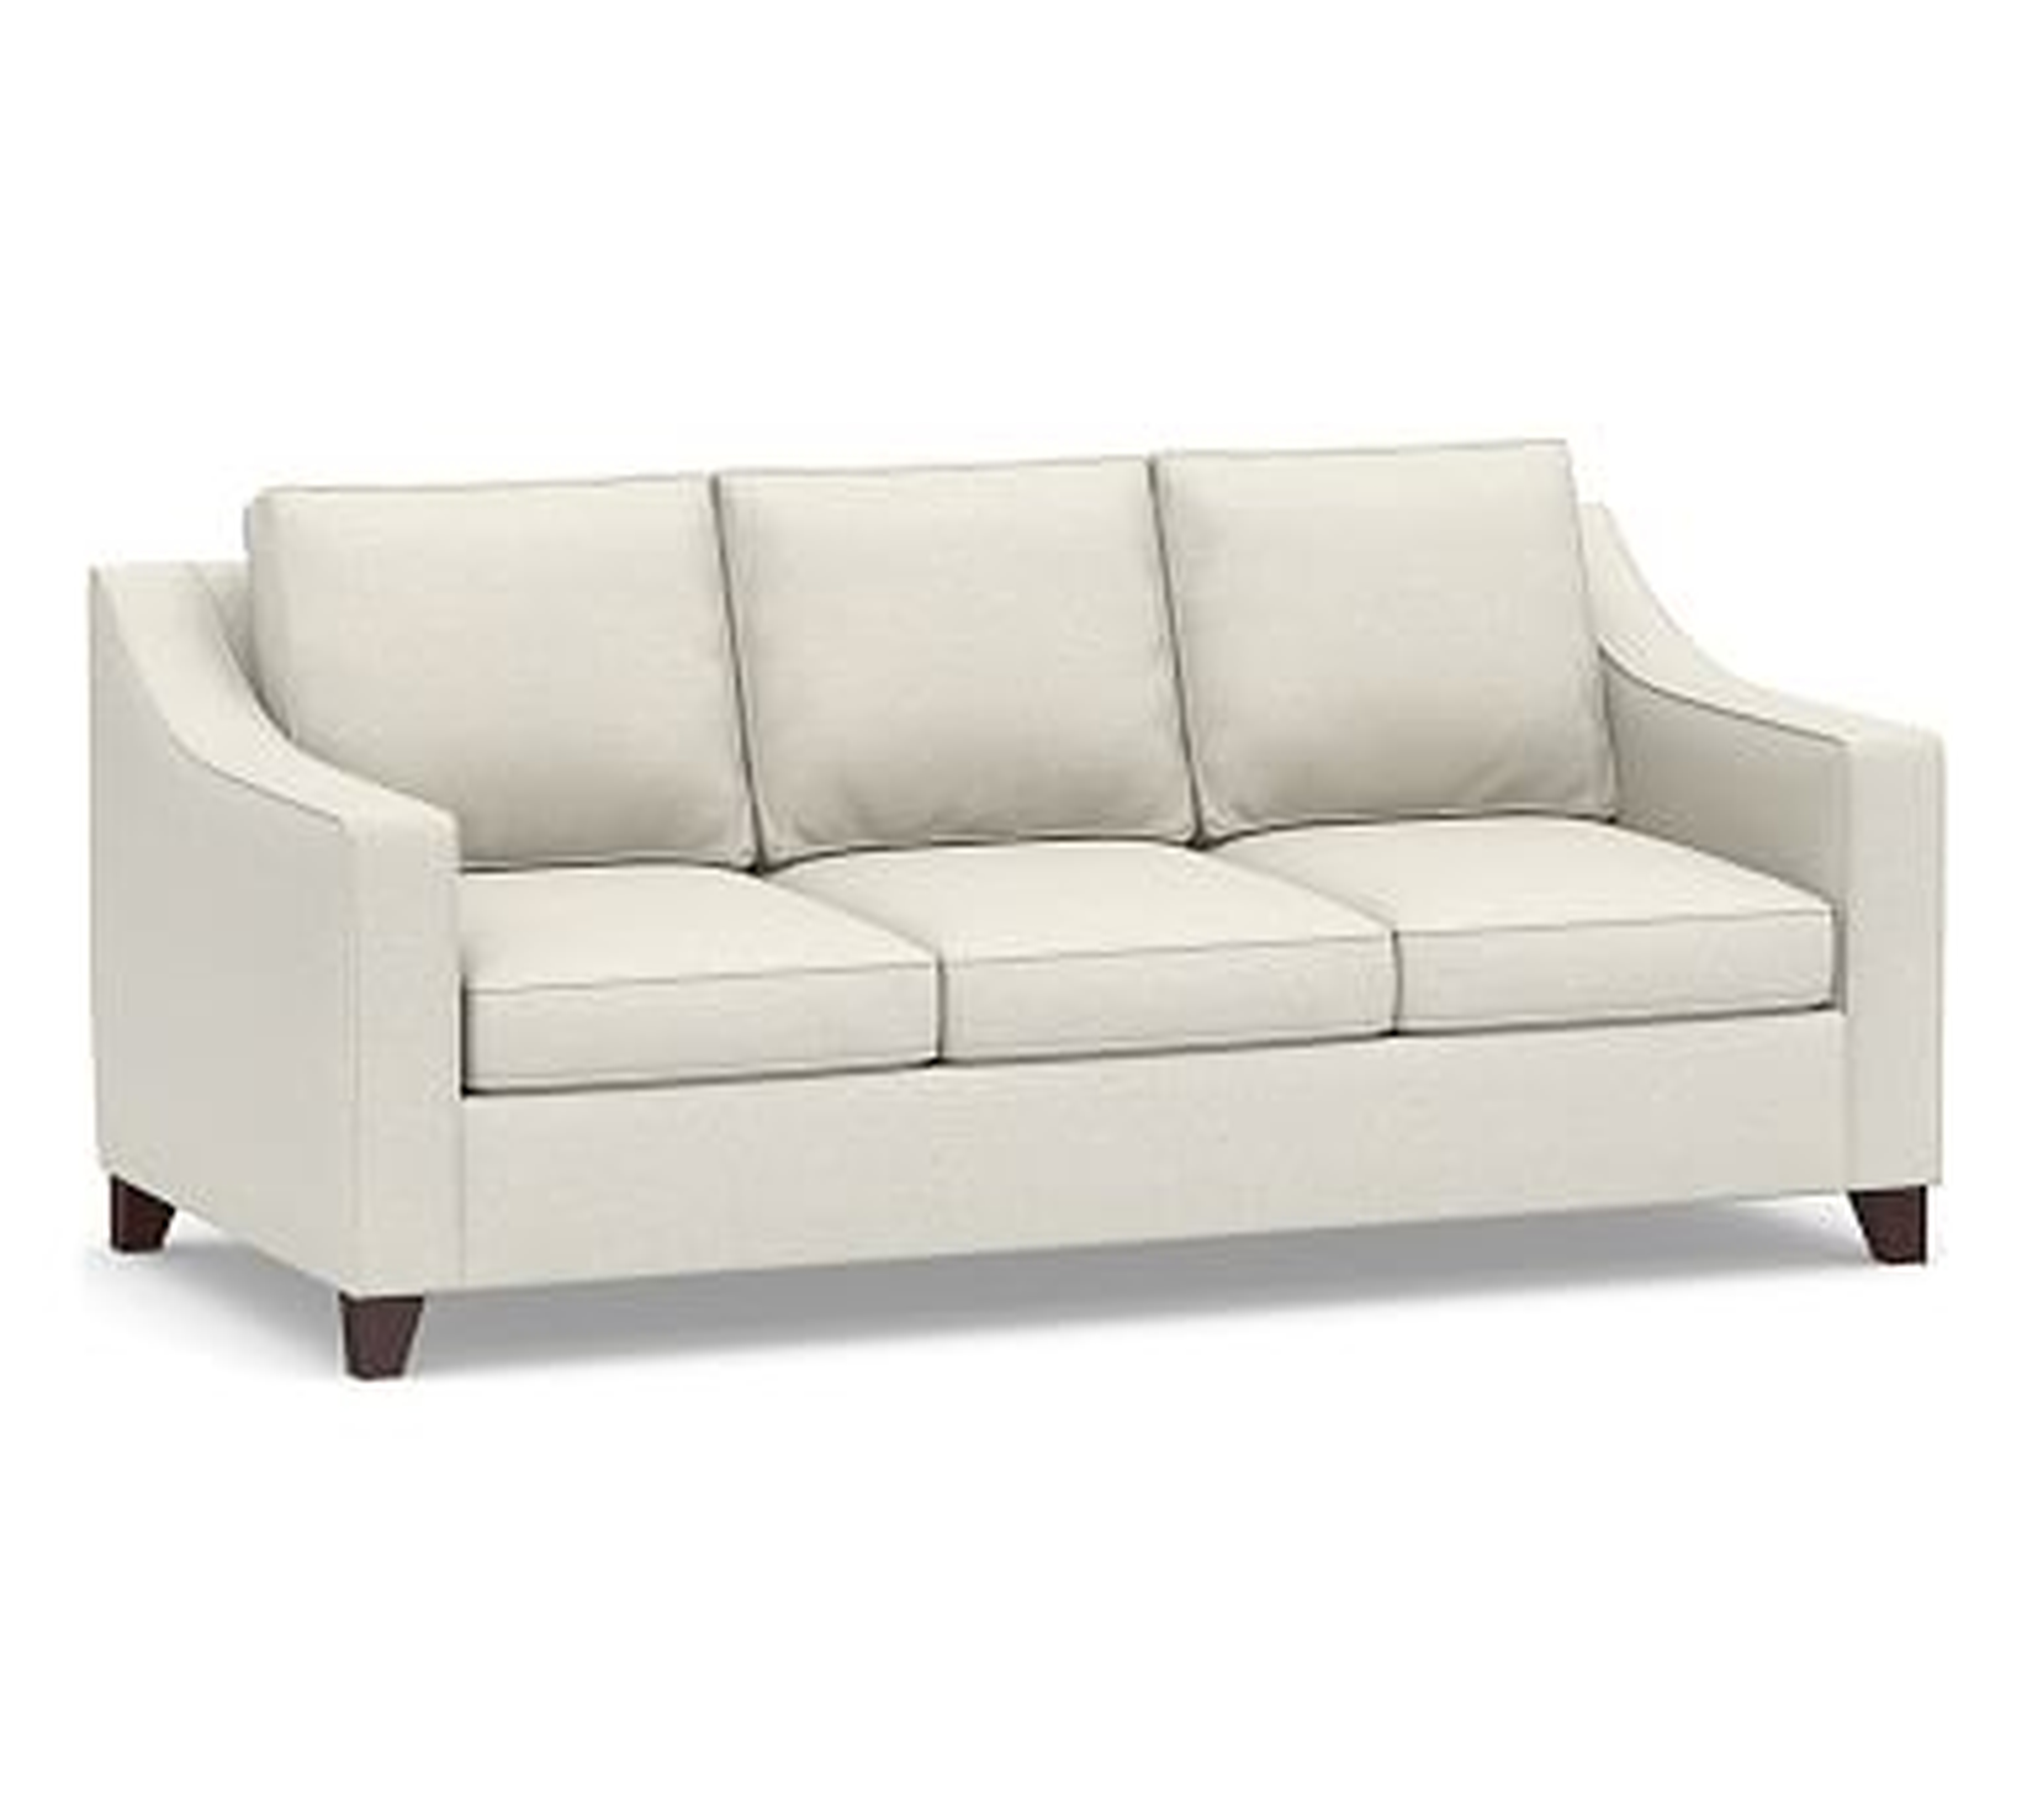 Cameron Slope Arm Upholstered Deep Seat Sofa 3-Seater 85", Polyester Wrapped Cushions, Performance Boucle Oatmeal - Pottery Barn